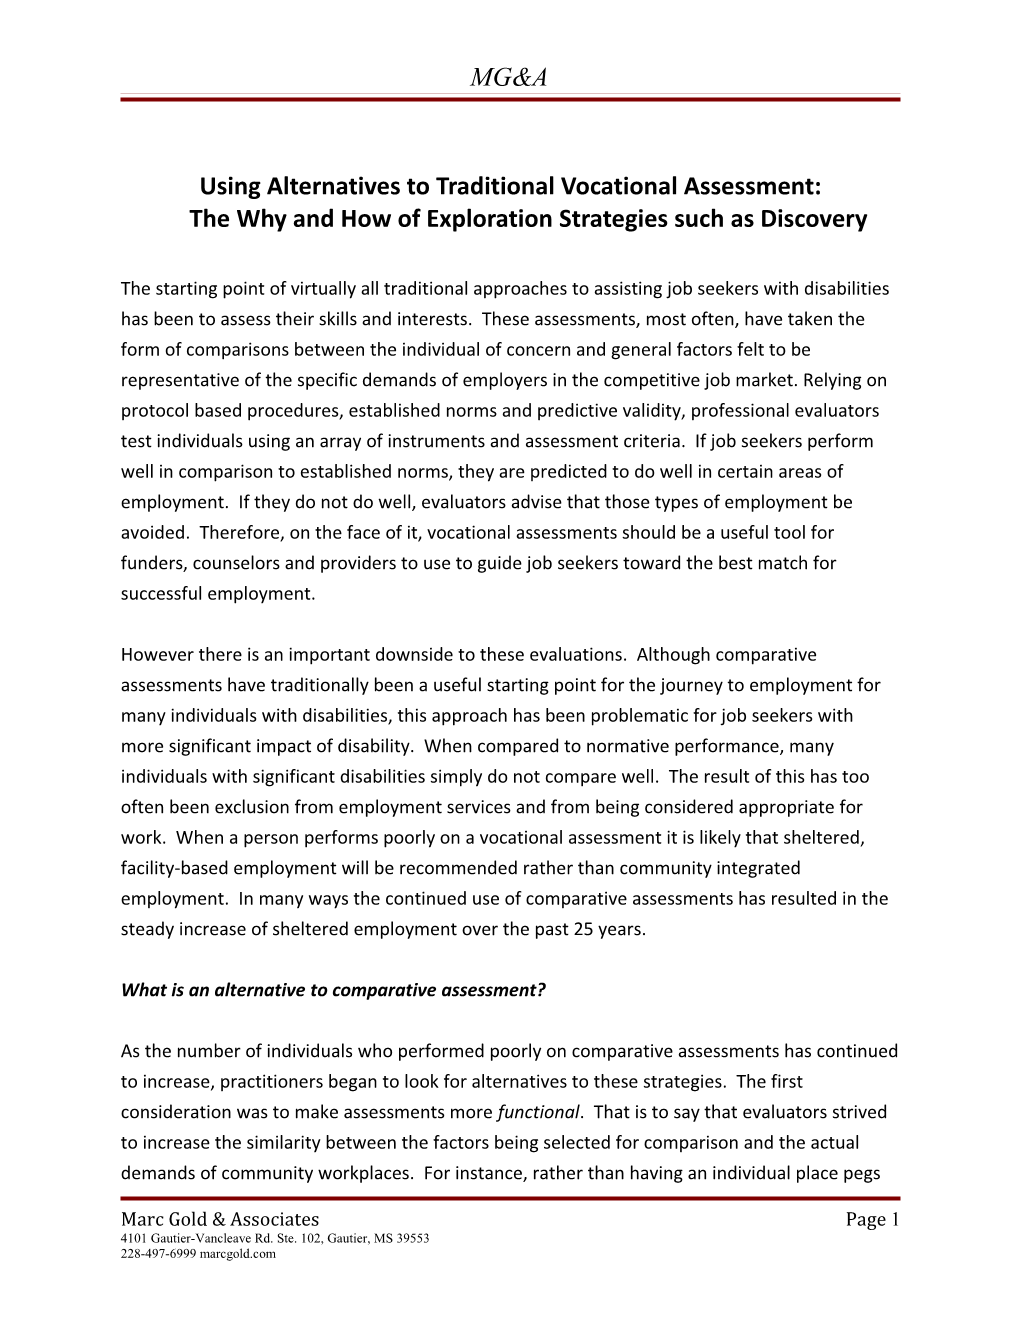 Using Alternatives to Traditional Vocational Assessment